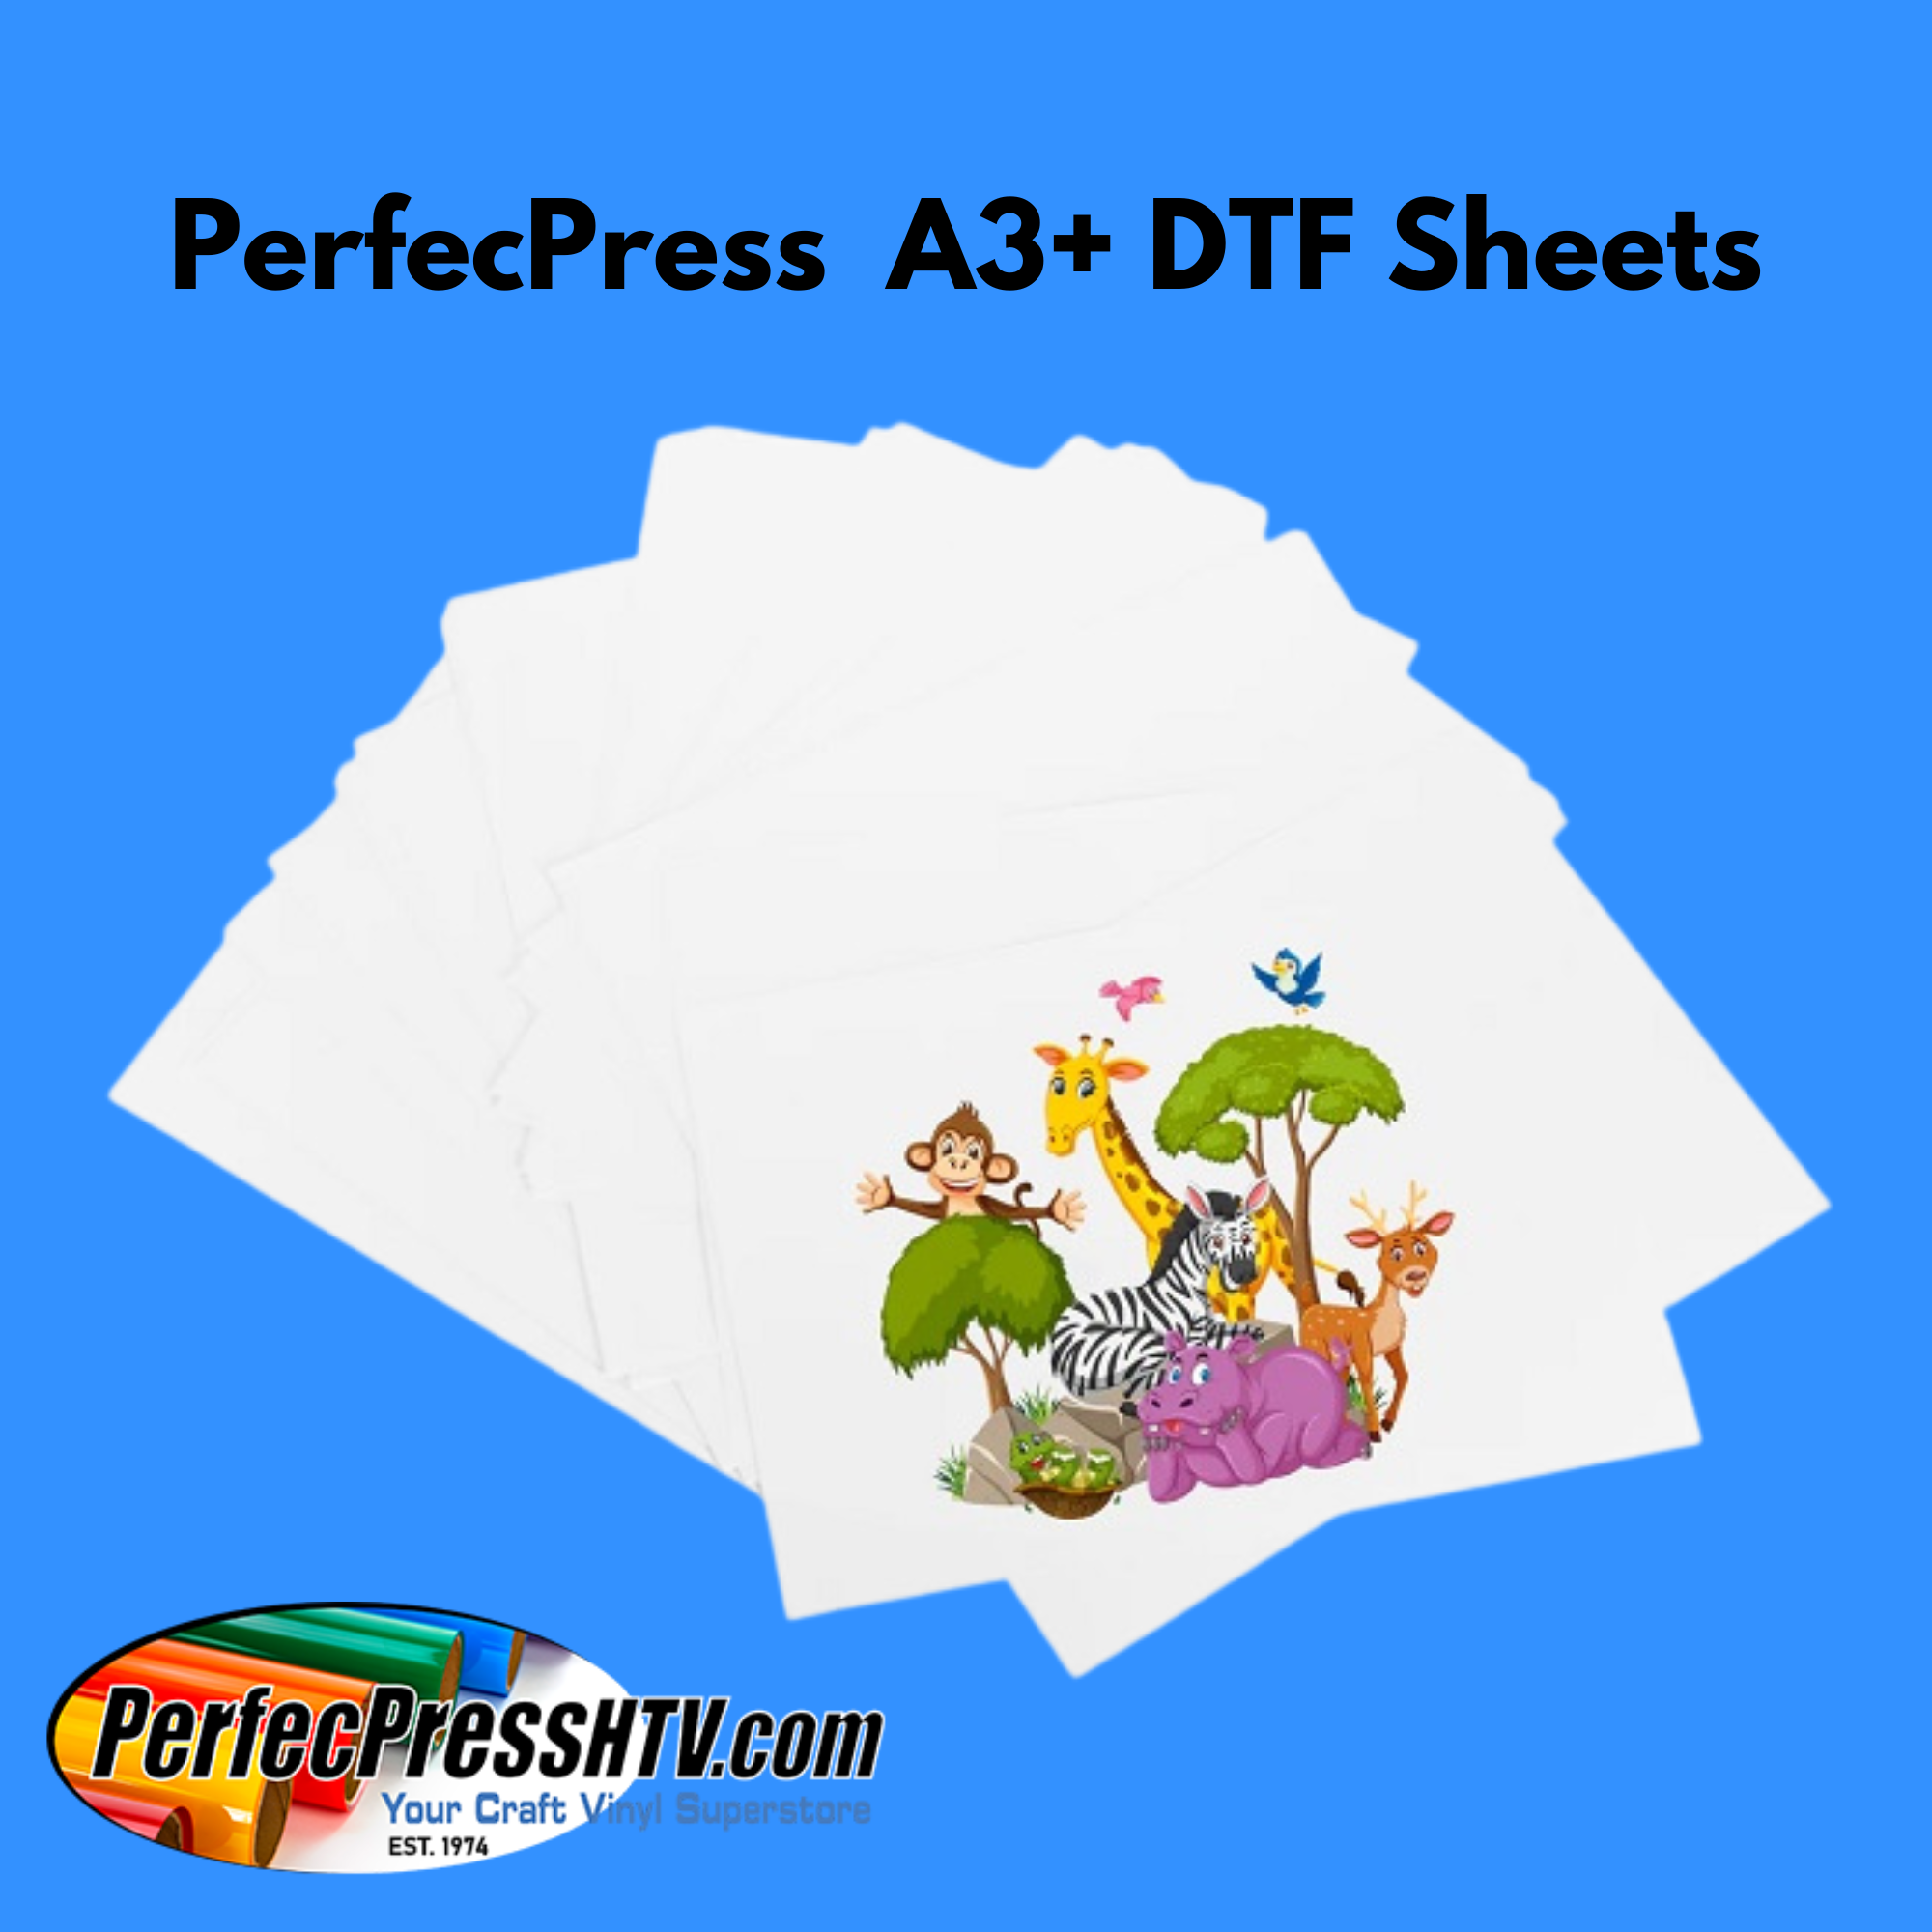 Dtf Supplier Dtf Pet Transfer Film Direct to Film Pet Heat Transfer Sheets  Cold and Warm Peel Sublimation - China Pet Film Dtf, Transfer Film Dtf